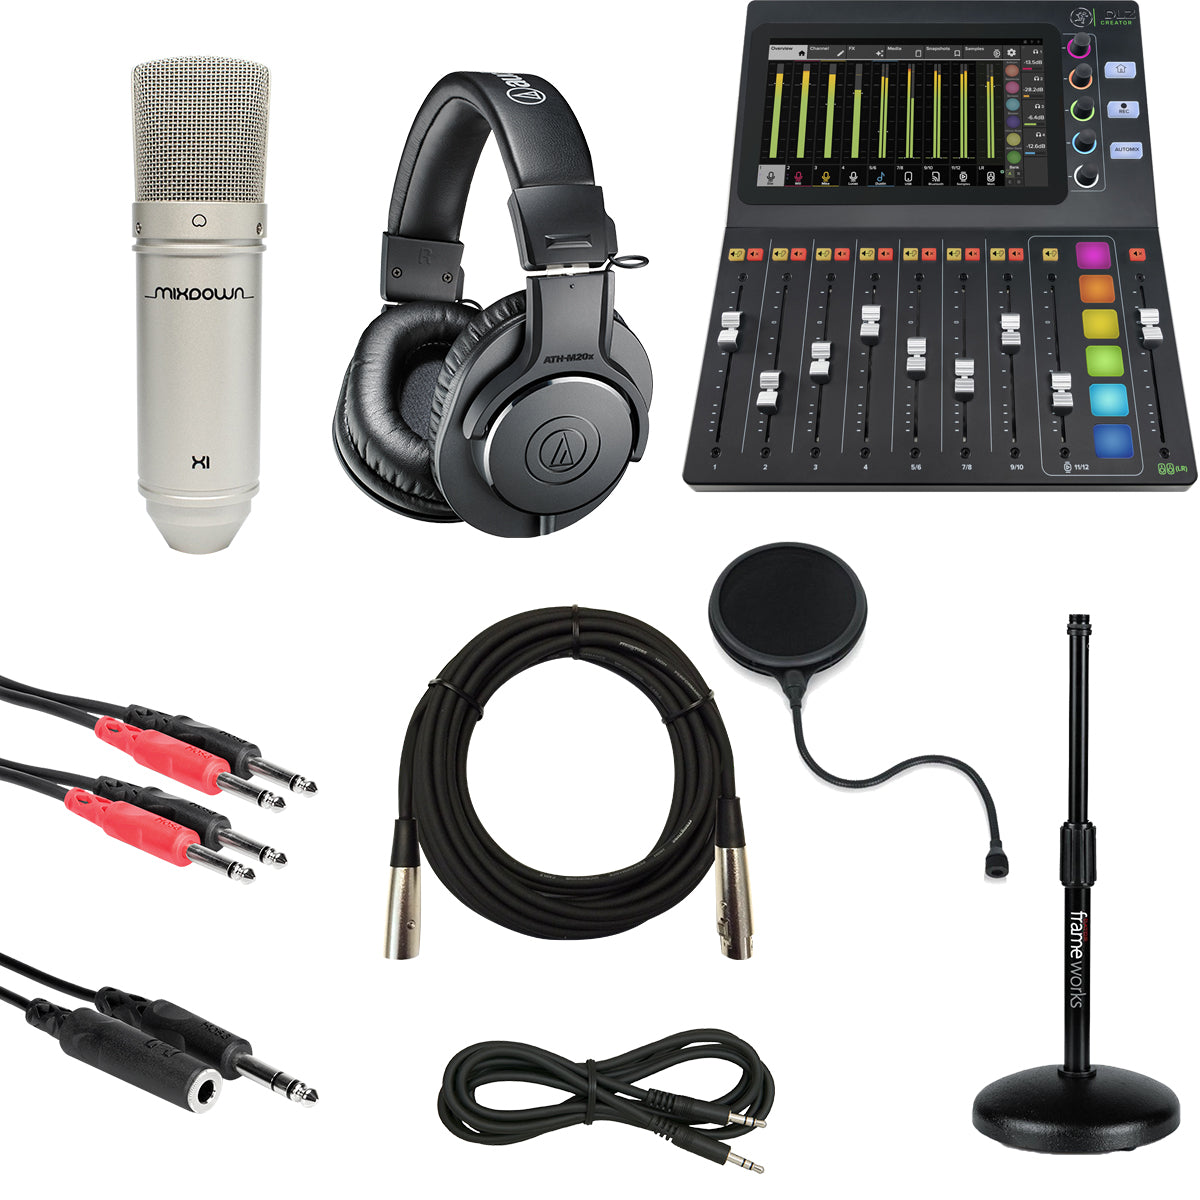 Collage image of the Mackie DLZ Creator Digital Podcasting/Streaming Mixer STUDIO KIT